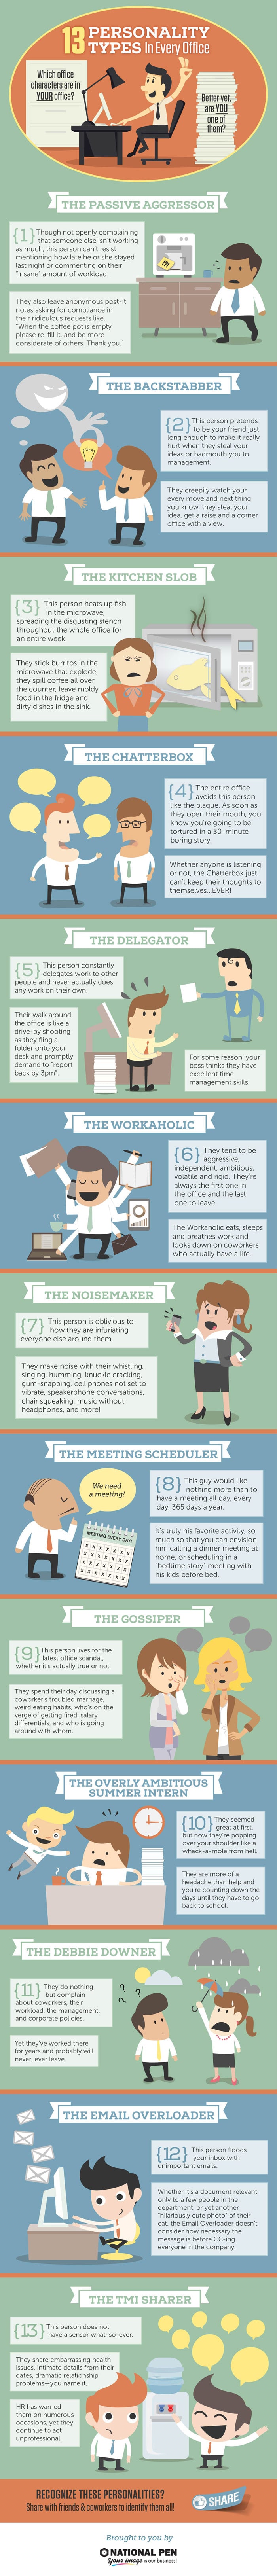 personalities-in-busy-office-infographic